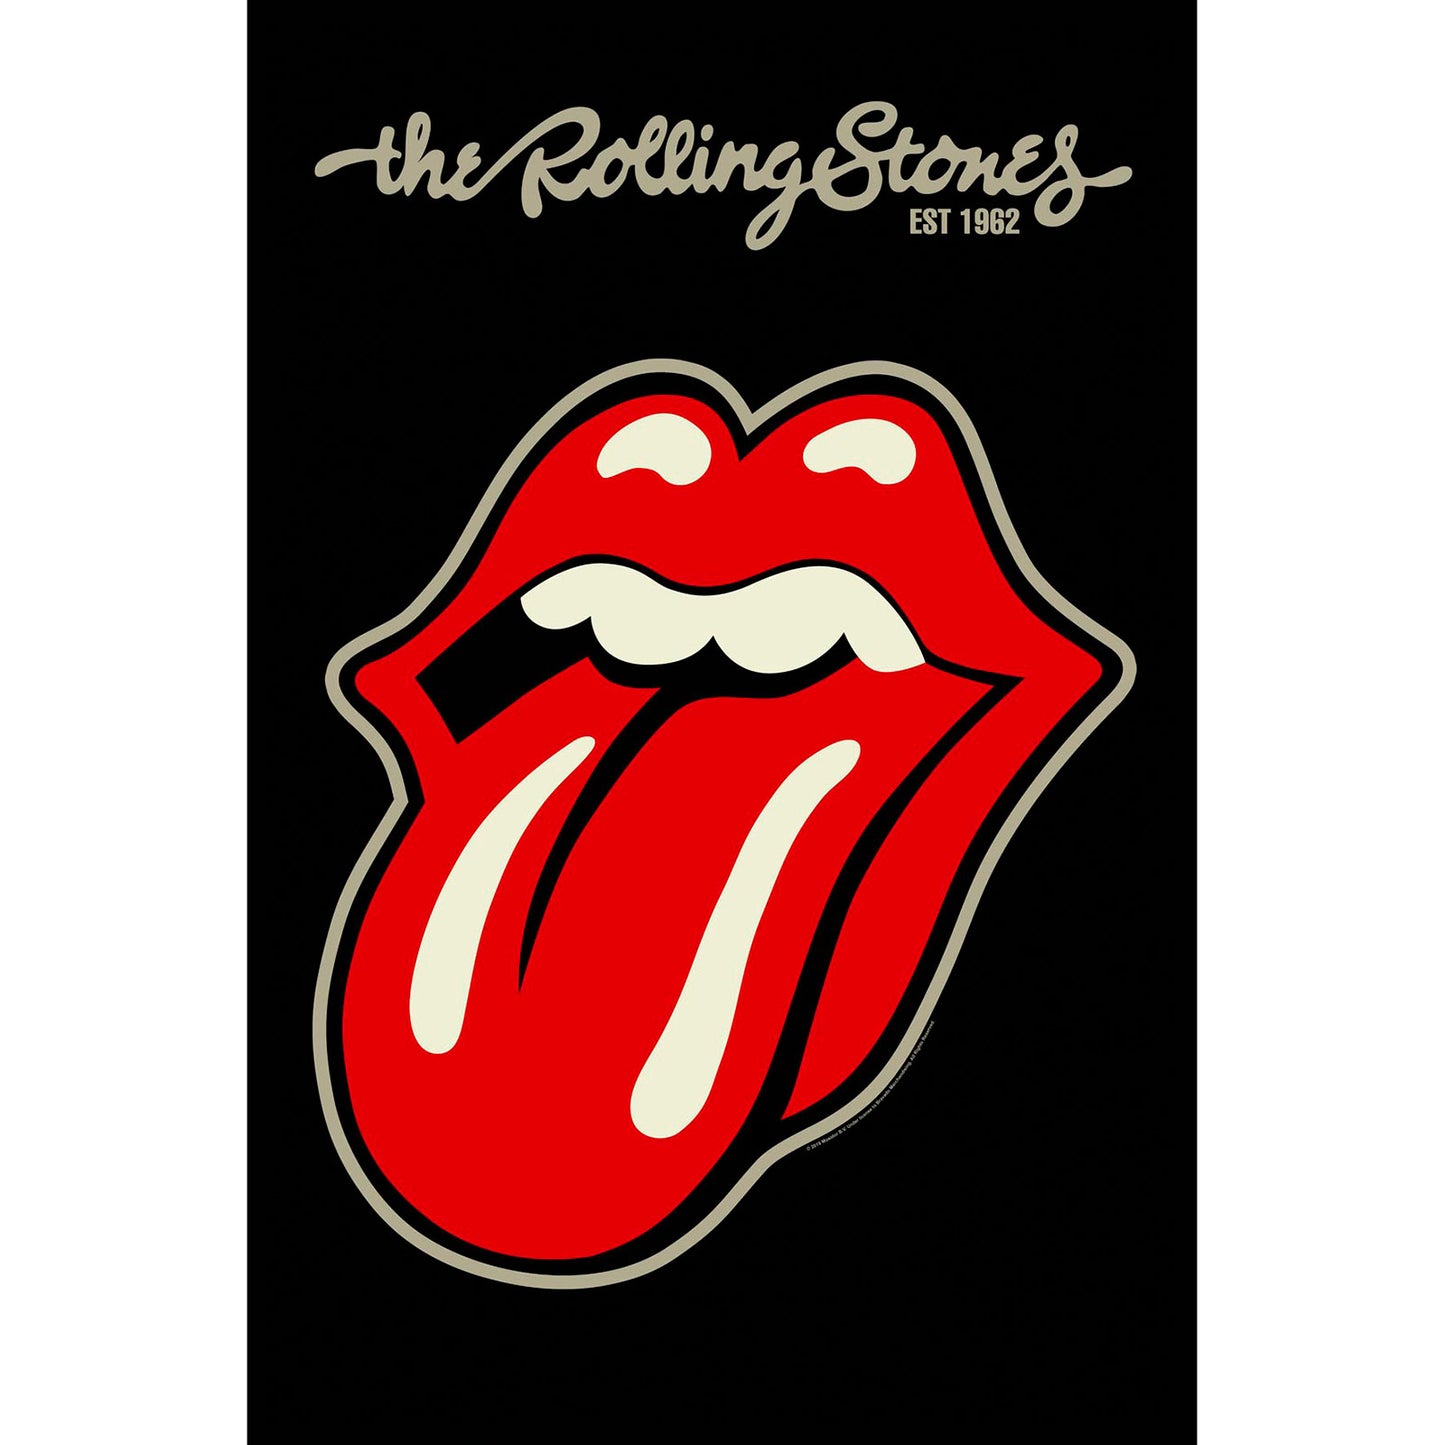 The Rolling Stones Textile Poster: Tongue